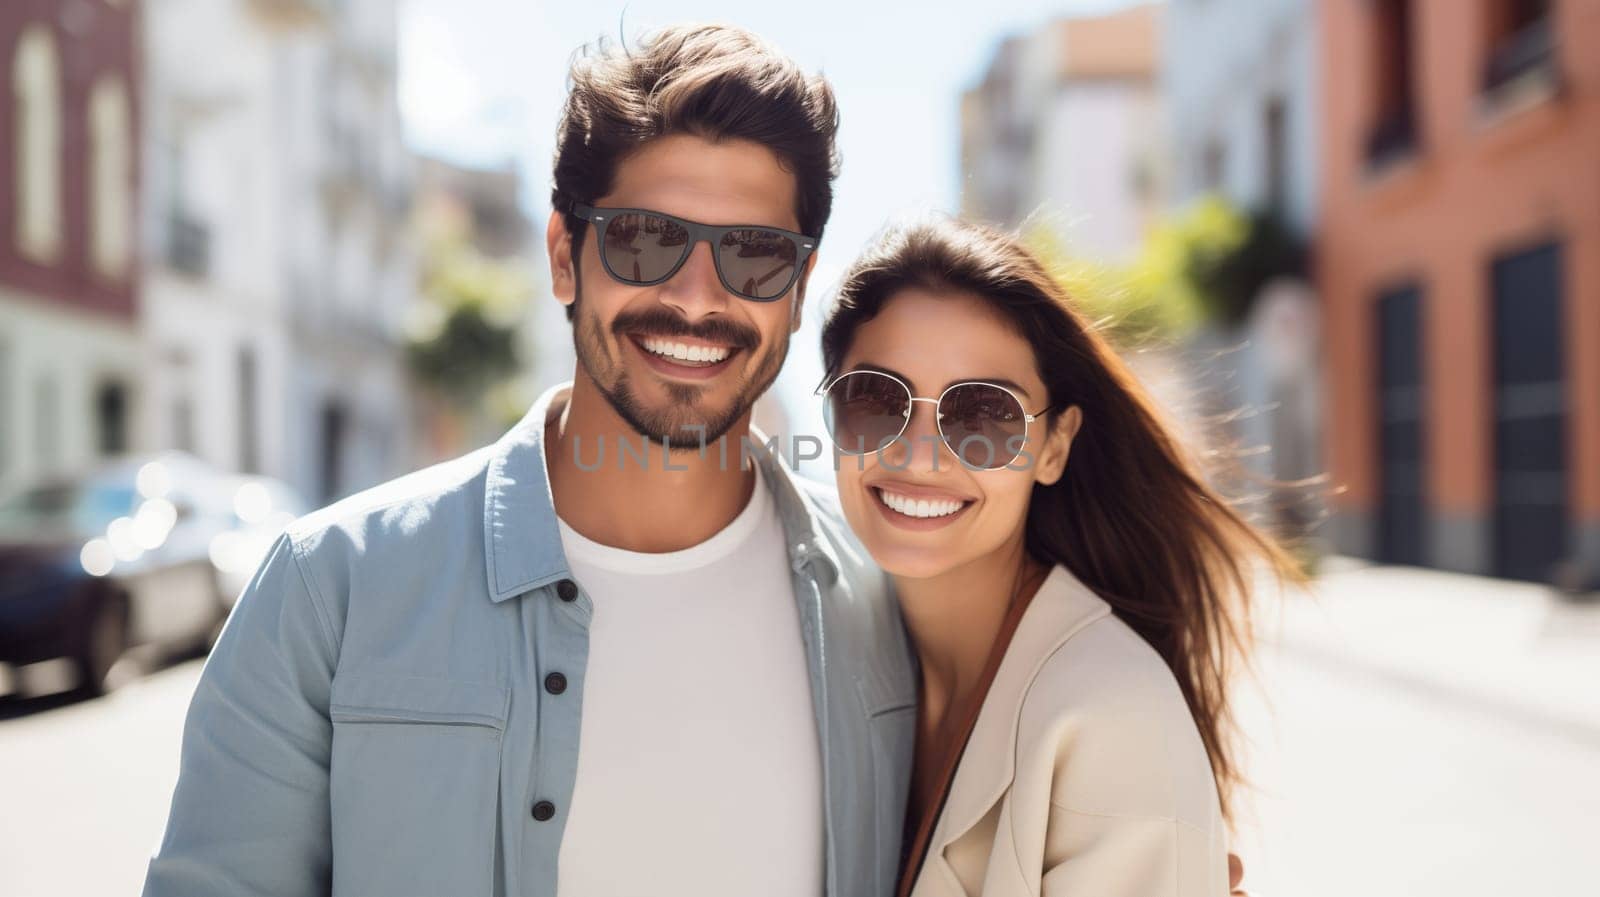 Lifestyle portrait of happy smiling young couple together enjoys a summer walk in sunny city